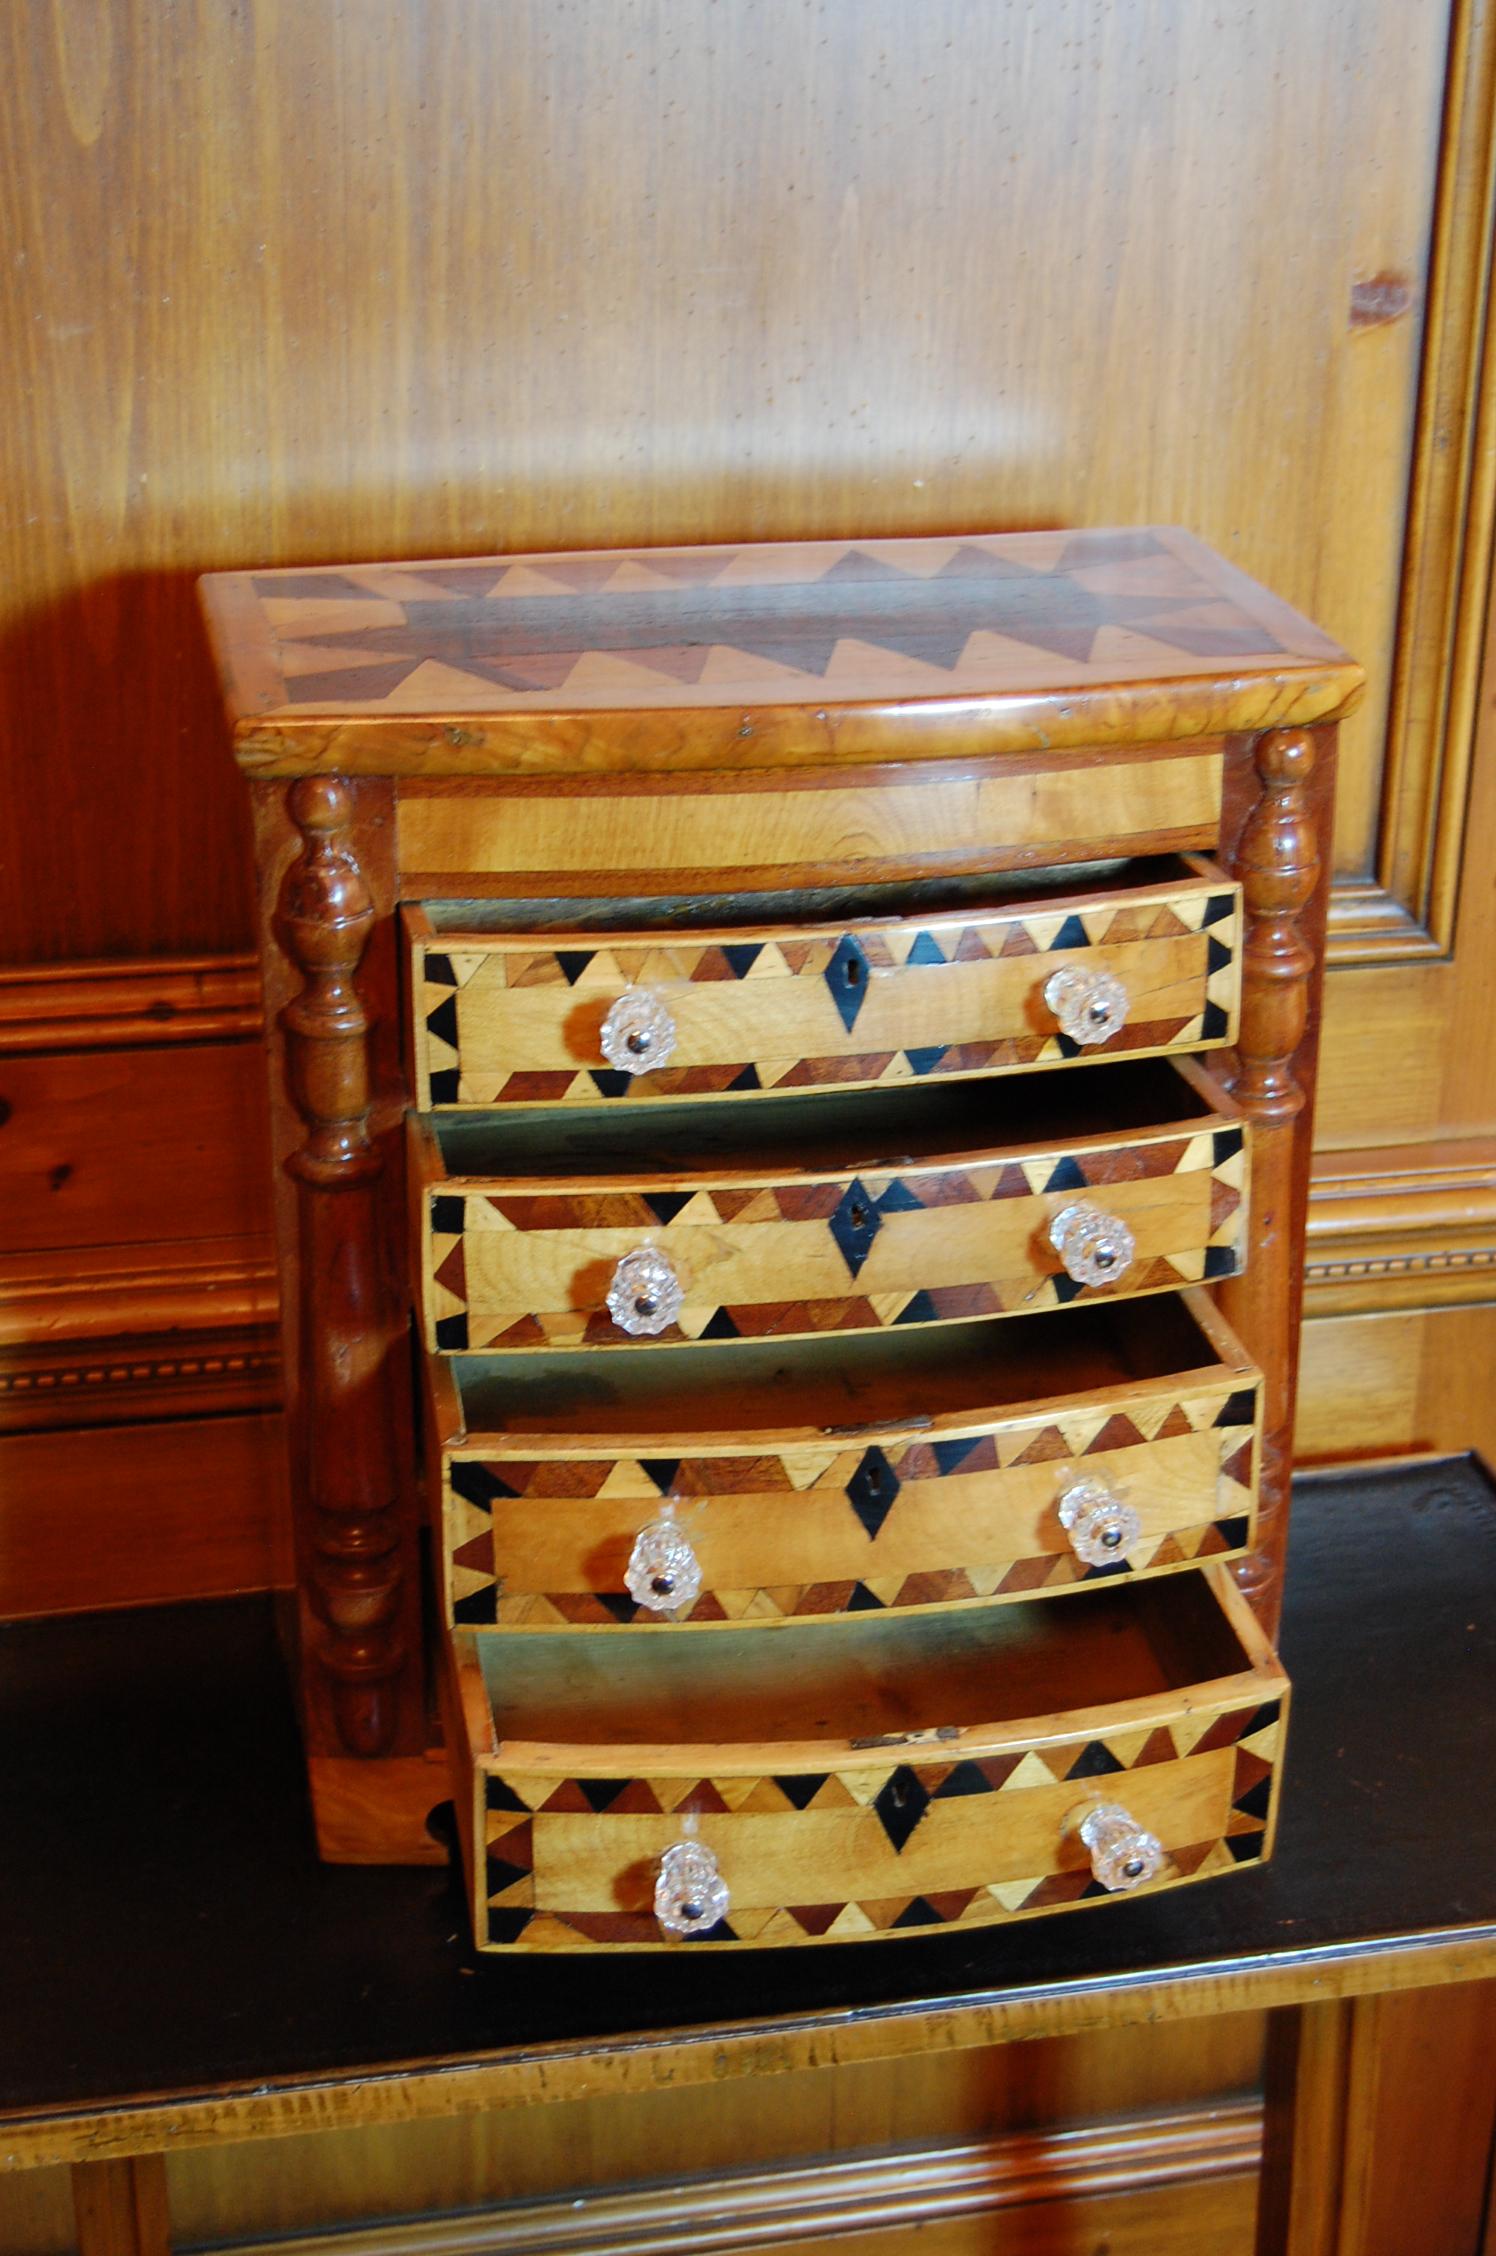 Wonderful American Tramp Art chest of drawers. Solid-end and bow fronted case fitted with four conforming drawers and parquetry inlaid. The original locks are present, but there are no keys. In a new French Polish finish.